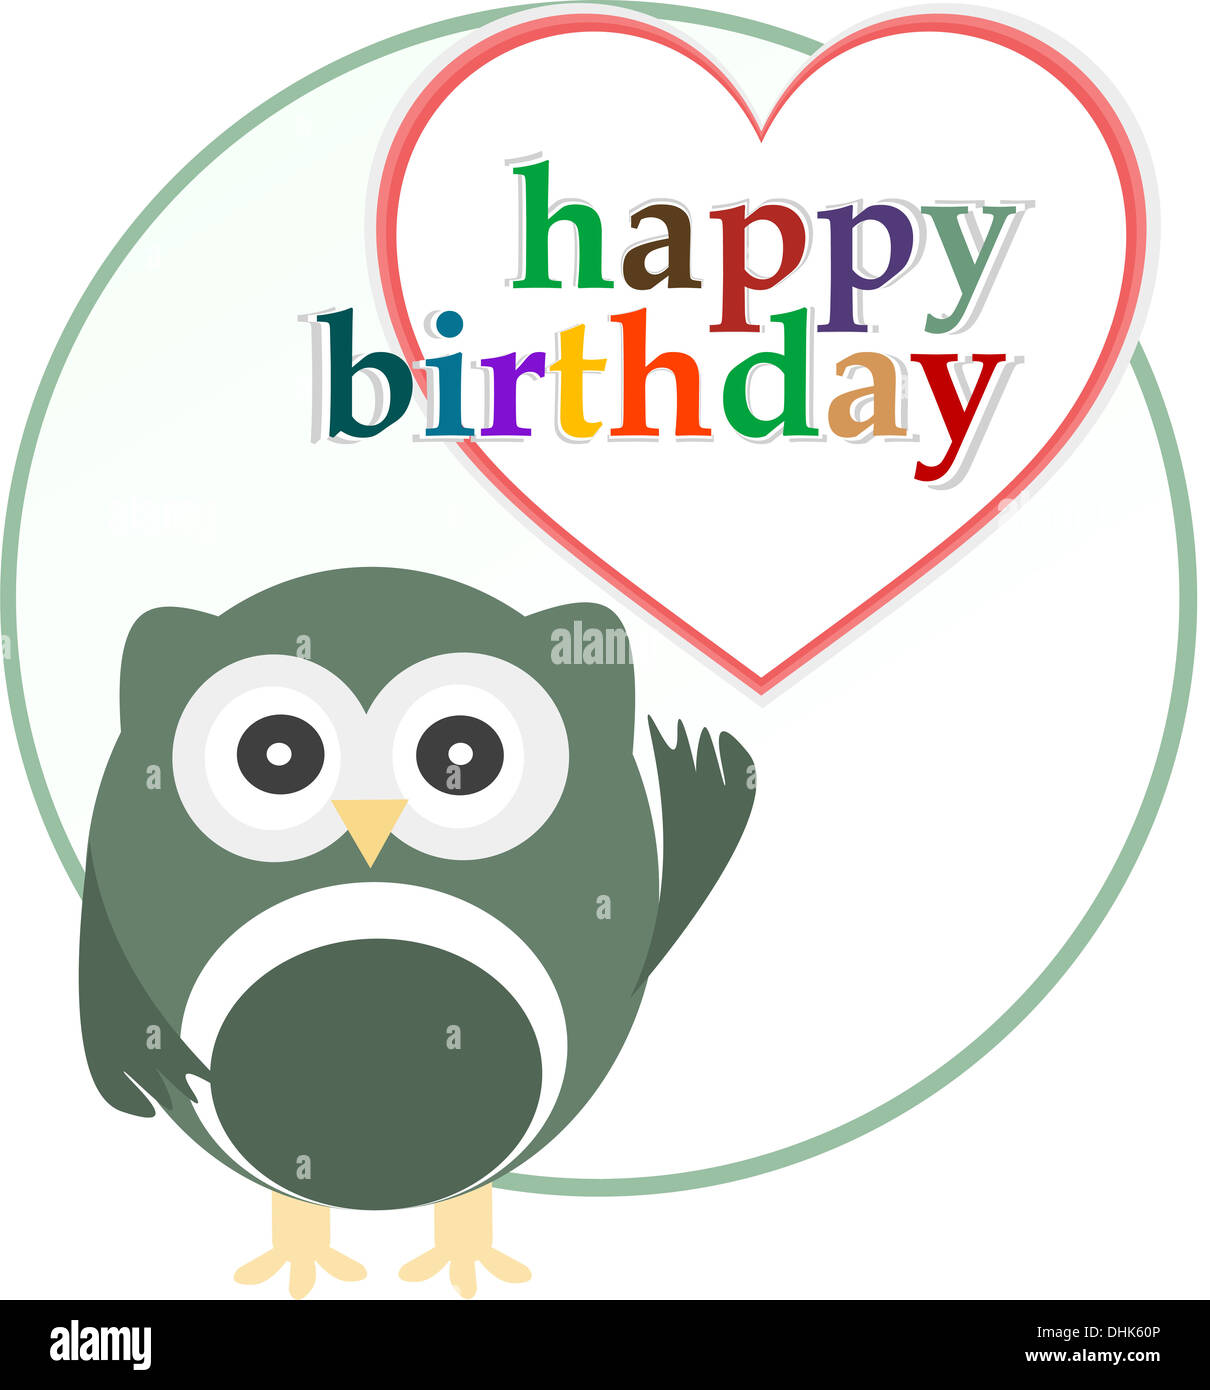 happy birthday party card with cute owl Stock Photo